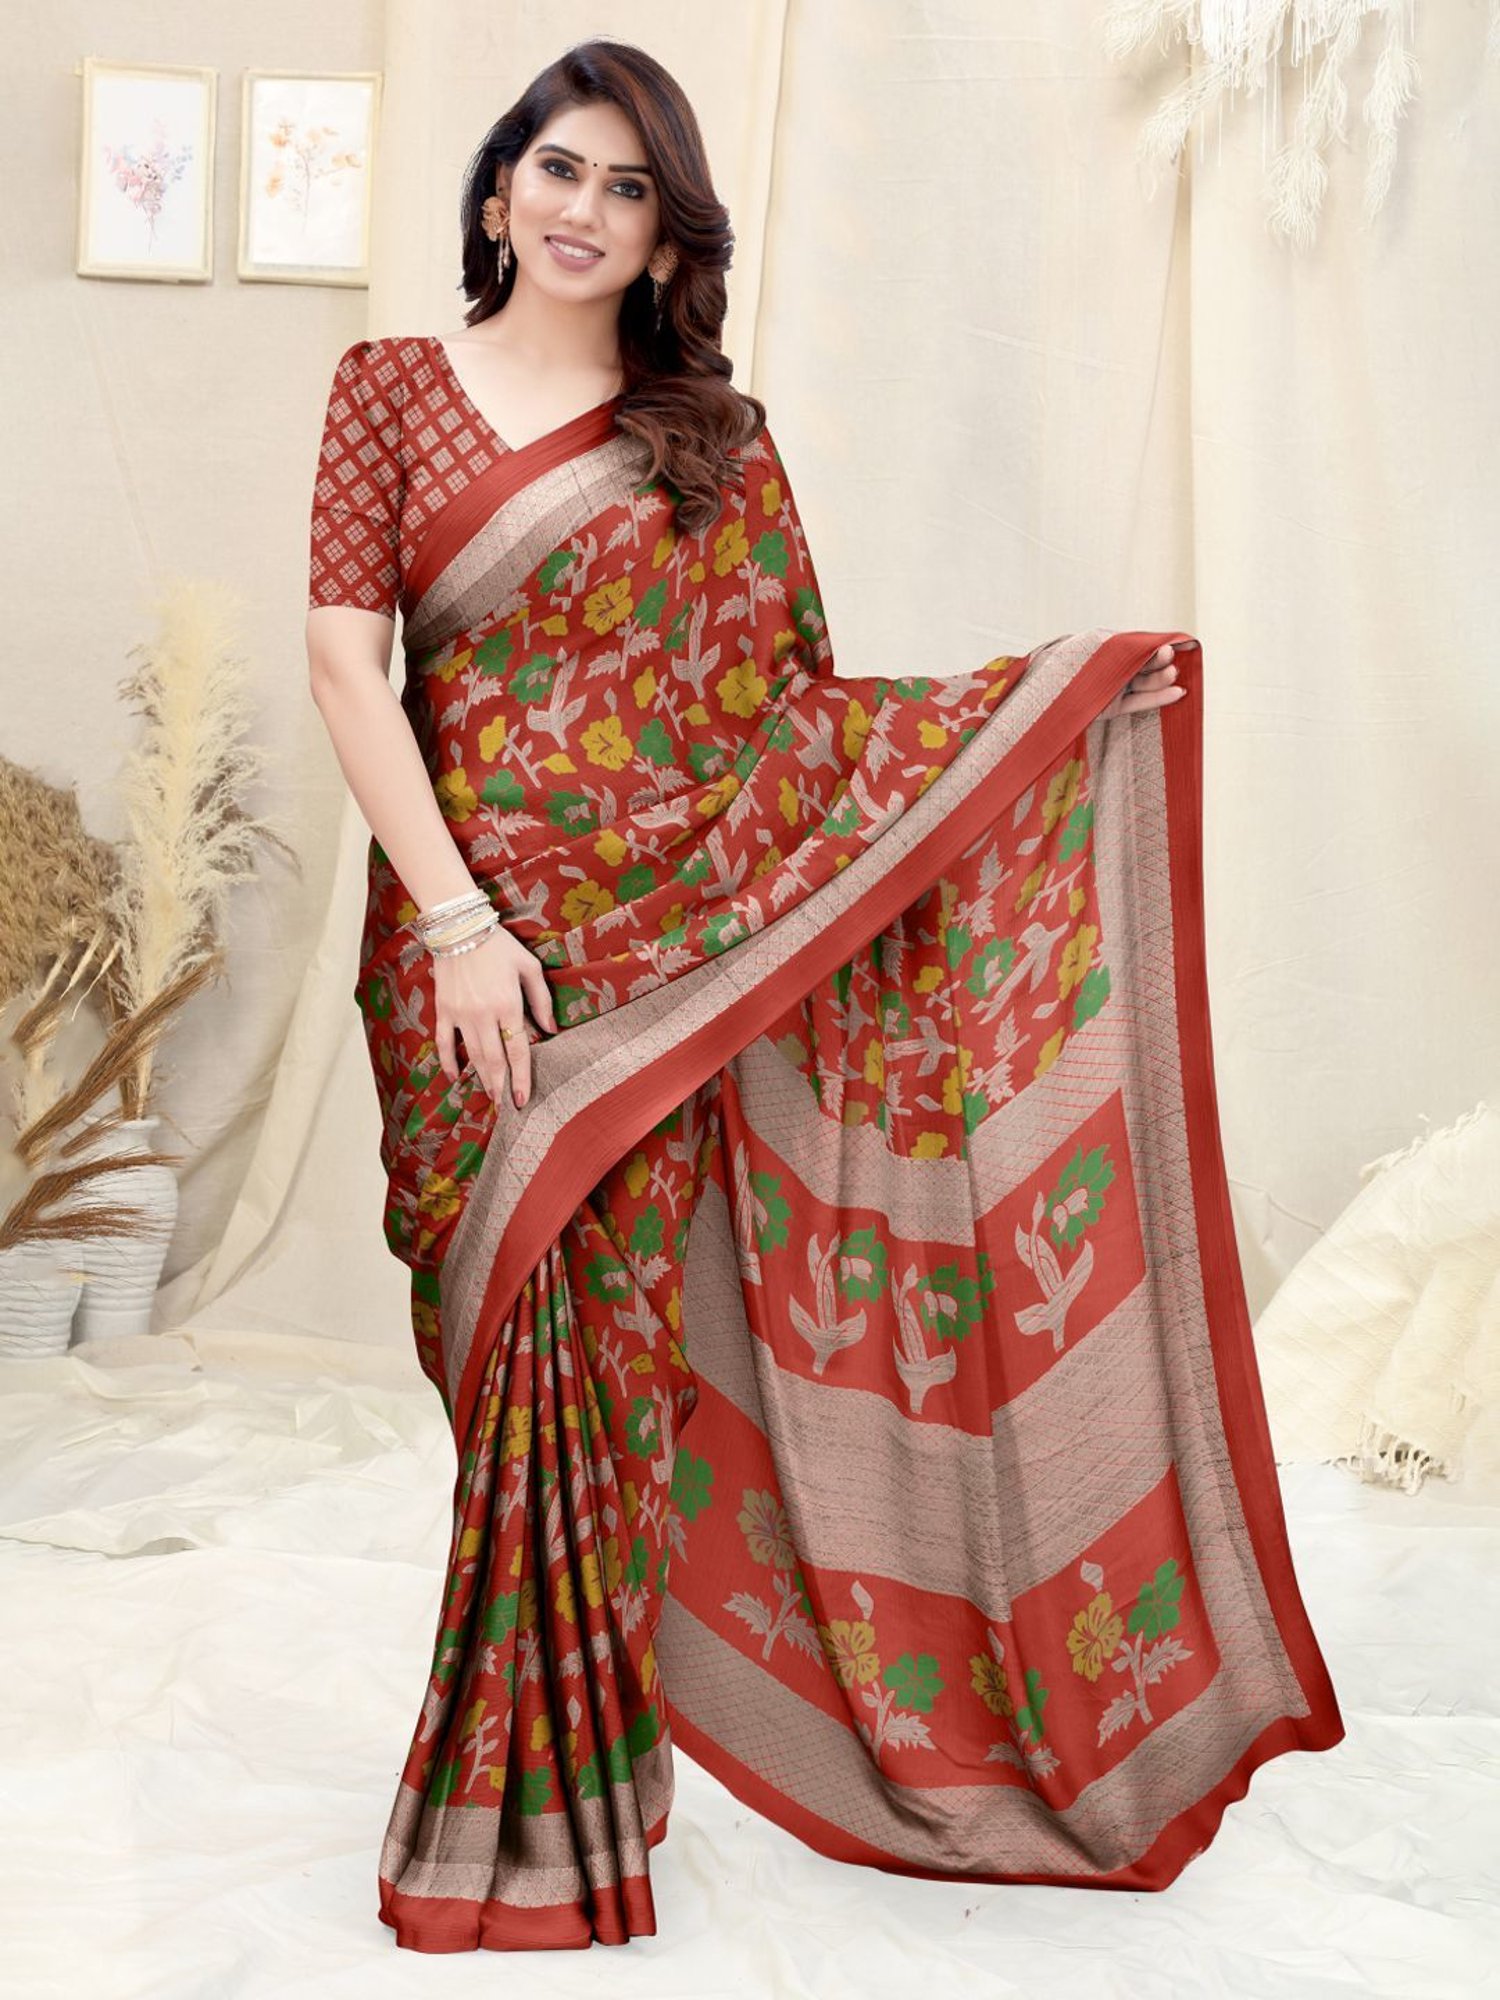 Redefine Fashion with Colourful Screen-Printed Sarees from Dora